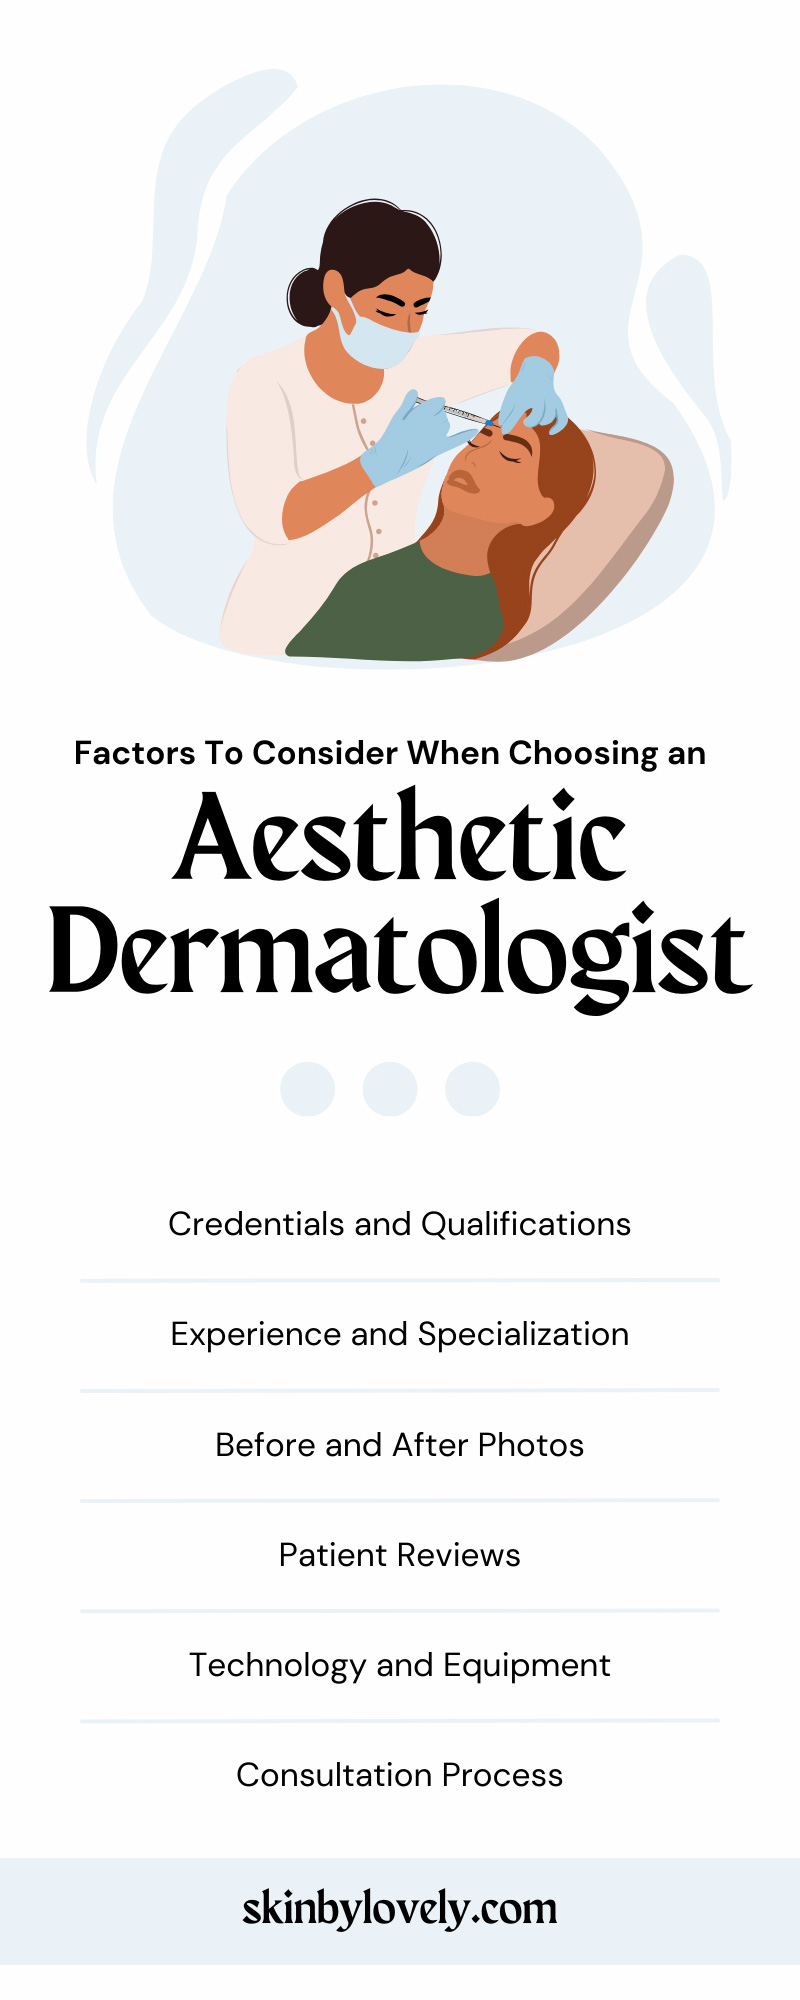 Factors To Consider When Choosing an Aesthetic Dermatologist